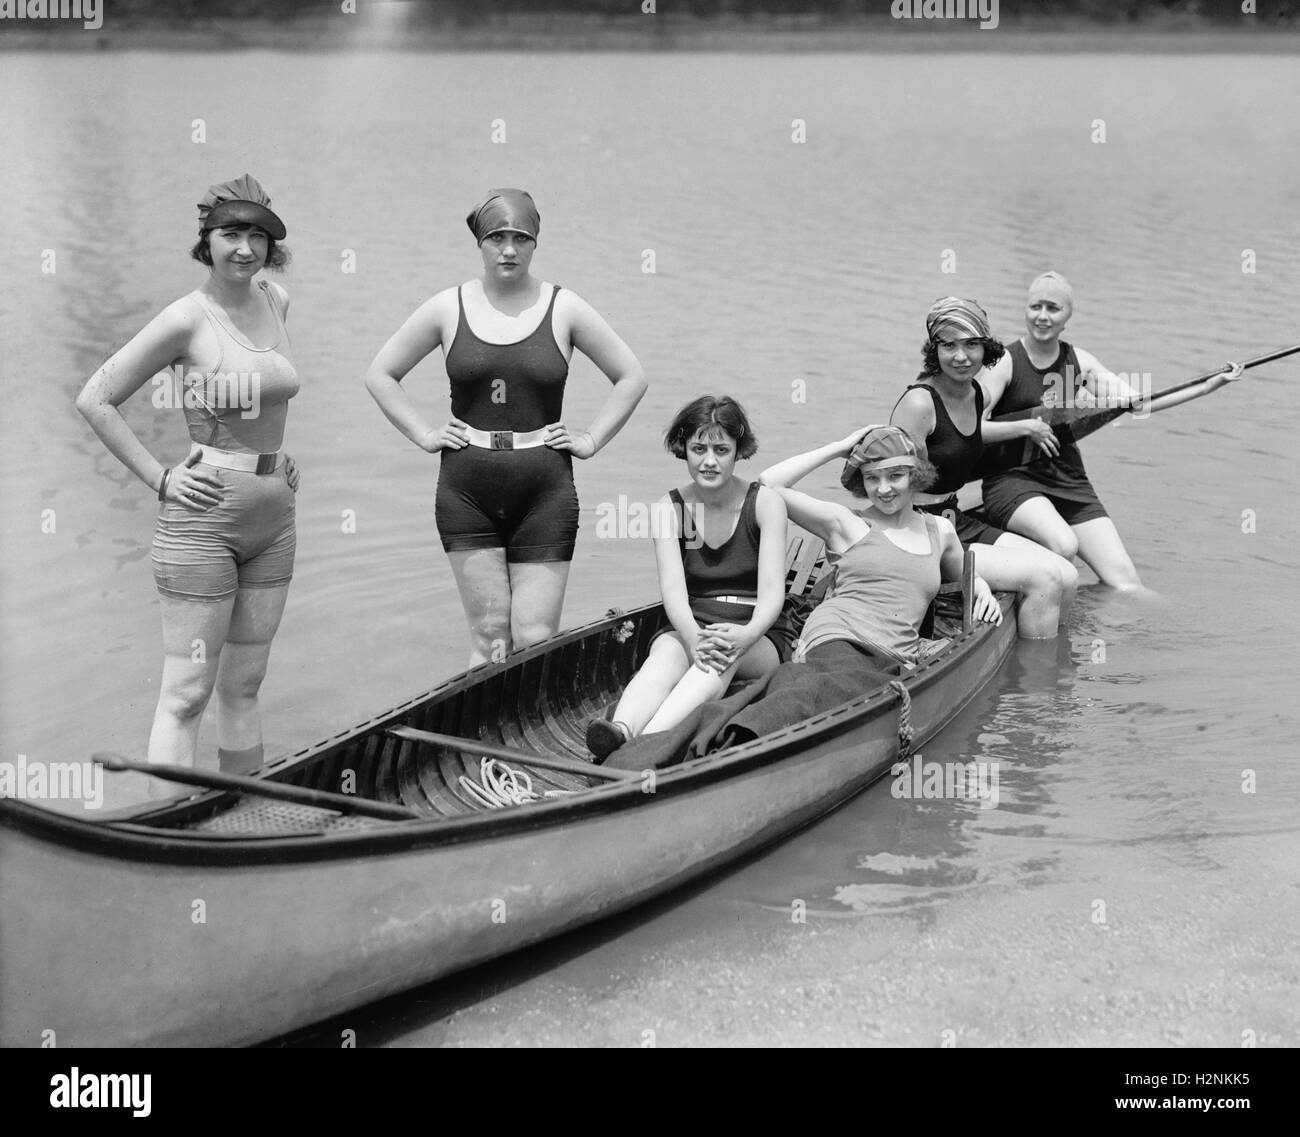 Actress Kay Laurel (seated with hat) and Group of Women in Bathing Suits Posing with Canoe at Bathing Beach, Washington DC, USA, National Photo Company, July 1922 Stock Photo